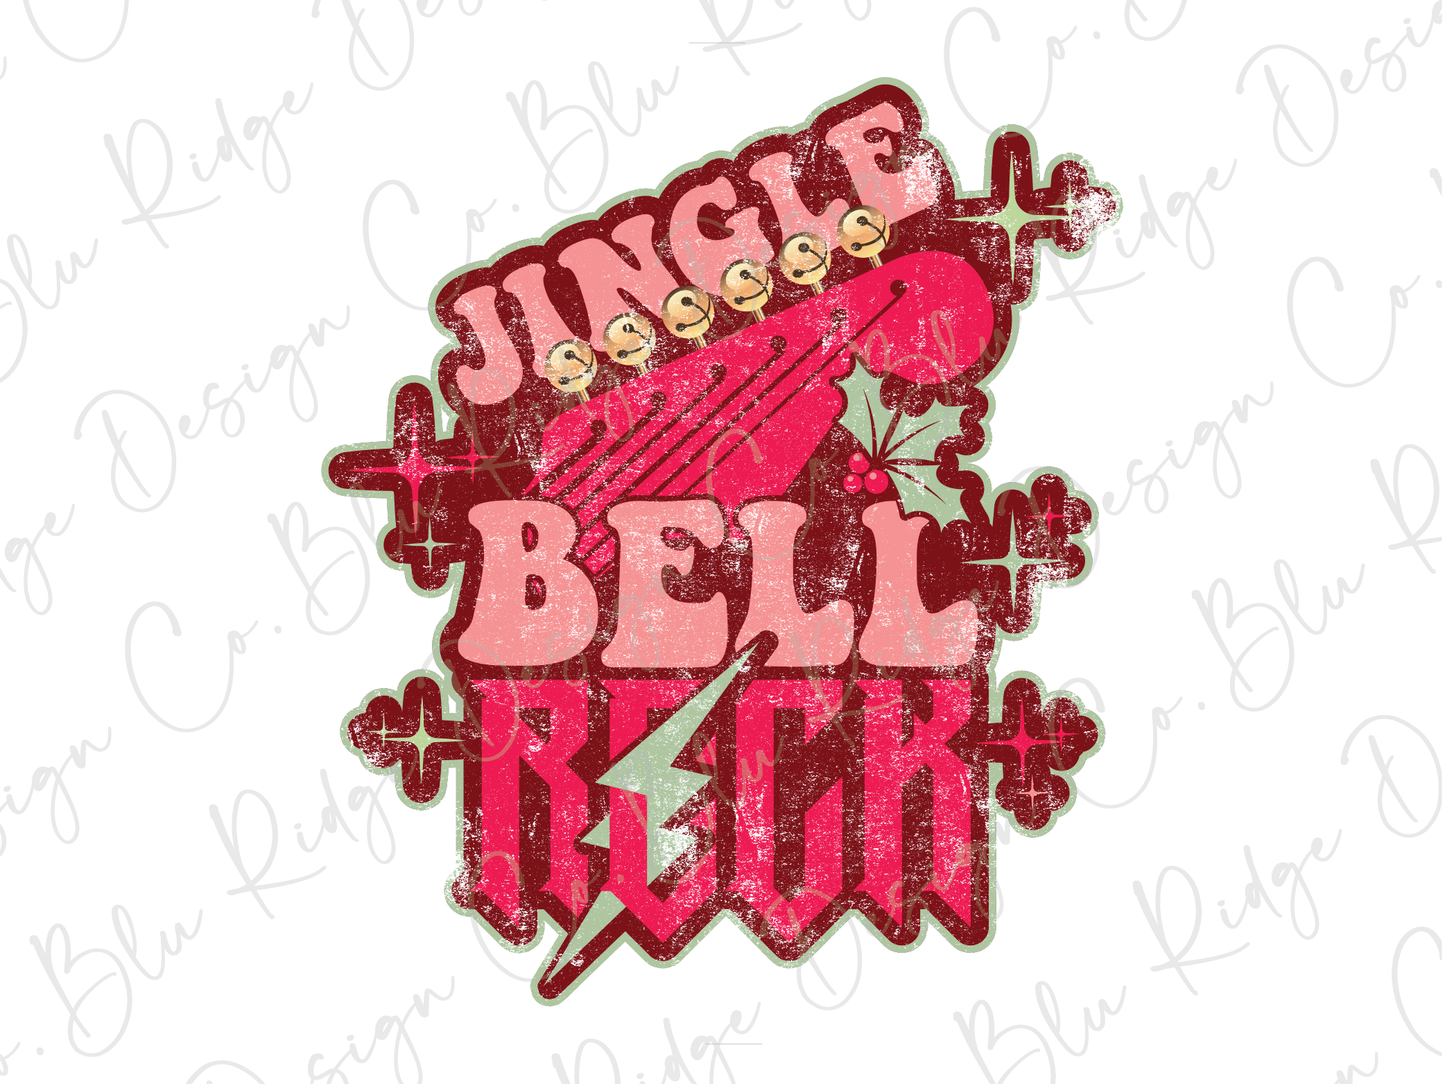 Jingle Bell Rock Retro Christmas Music Direct to Film (DTF) Transfer